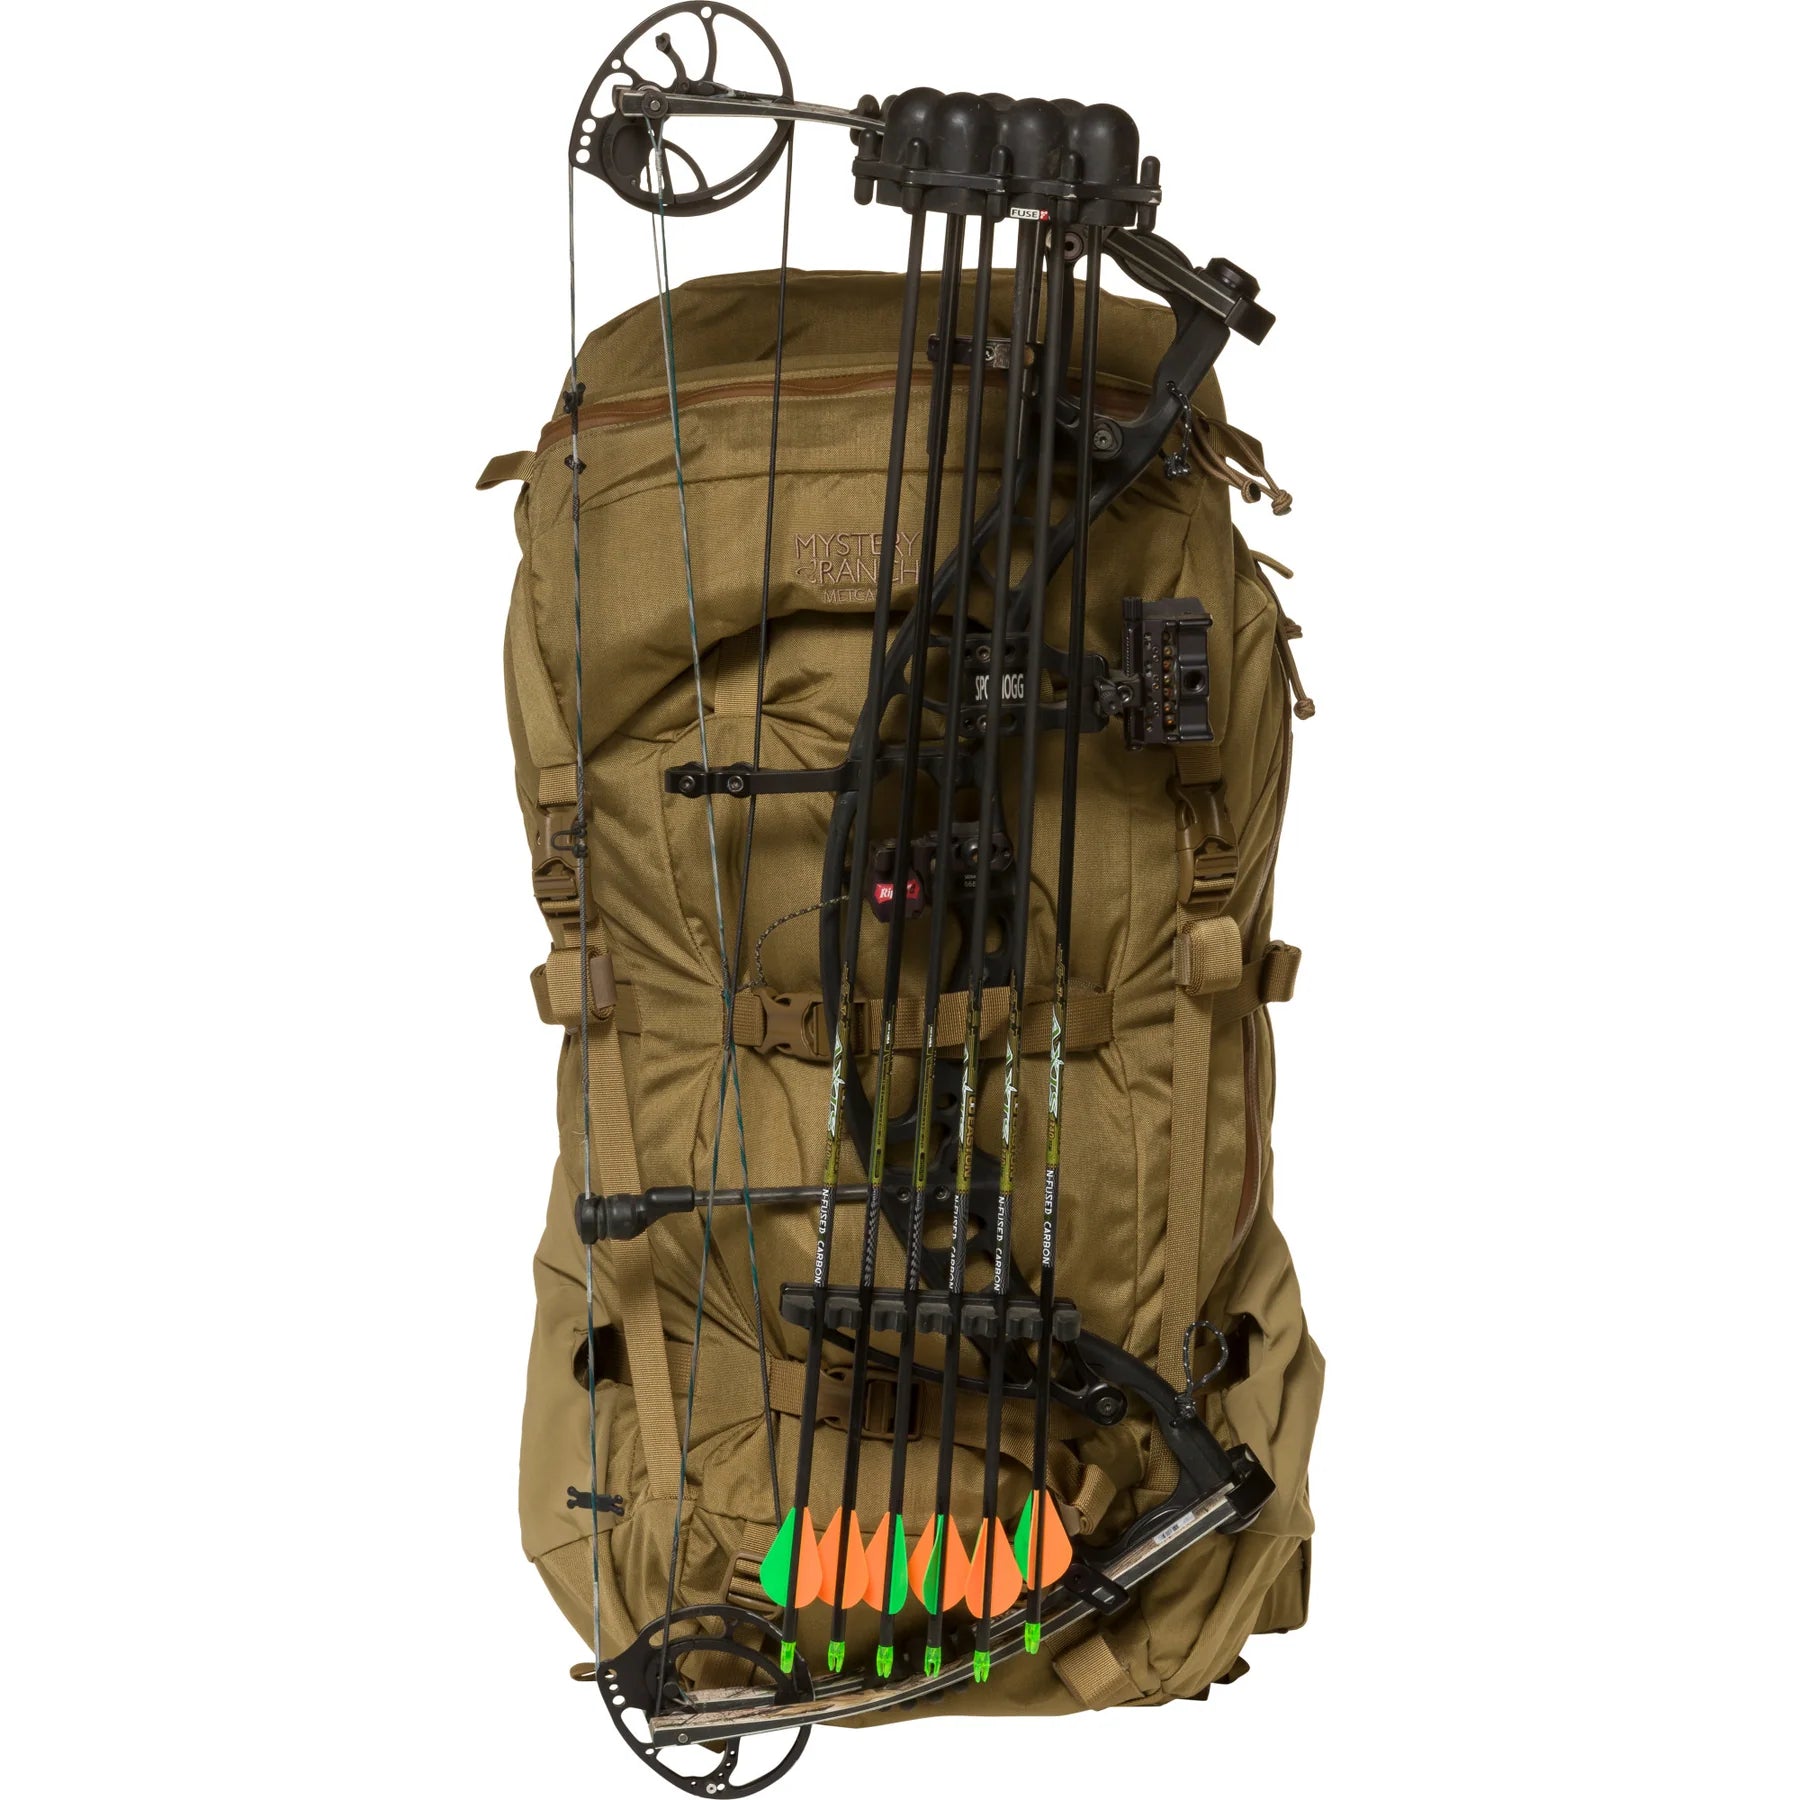 The METCALF is a versatile workhorse with enough volume for a week in the field but compressible enough for an afternoon stalk. Built onto our Guide Light MT™ Frame, the METCALF has ample heavyweight capacity, and the OVERLOAD® feature keeps bag contents clean when packing out game. www.defenceqstore.com.au